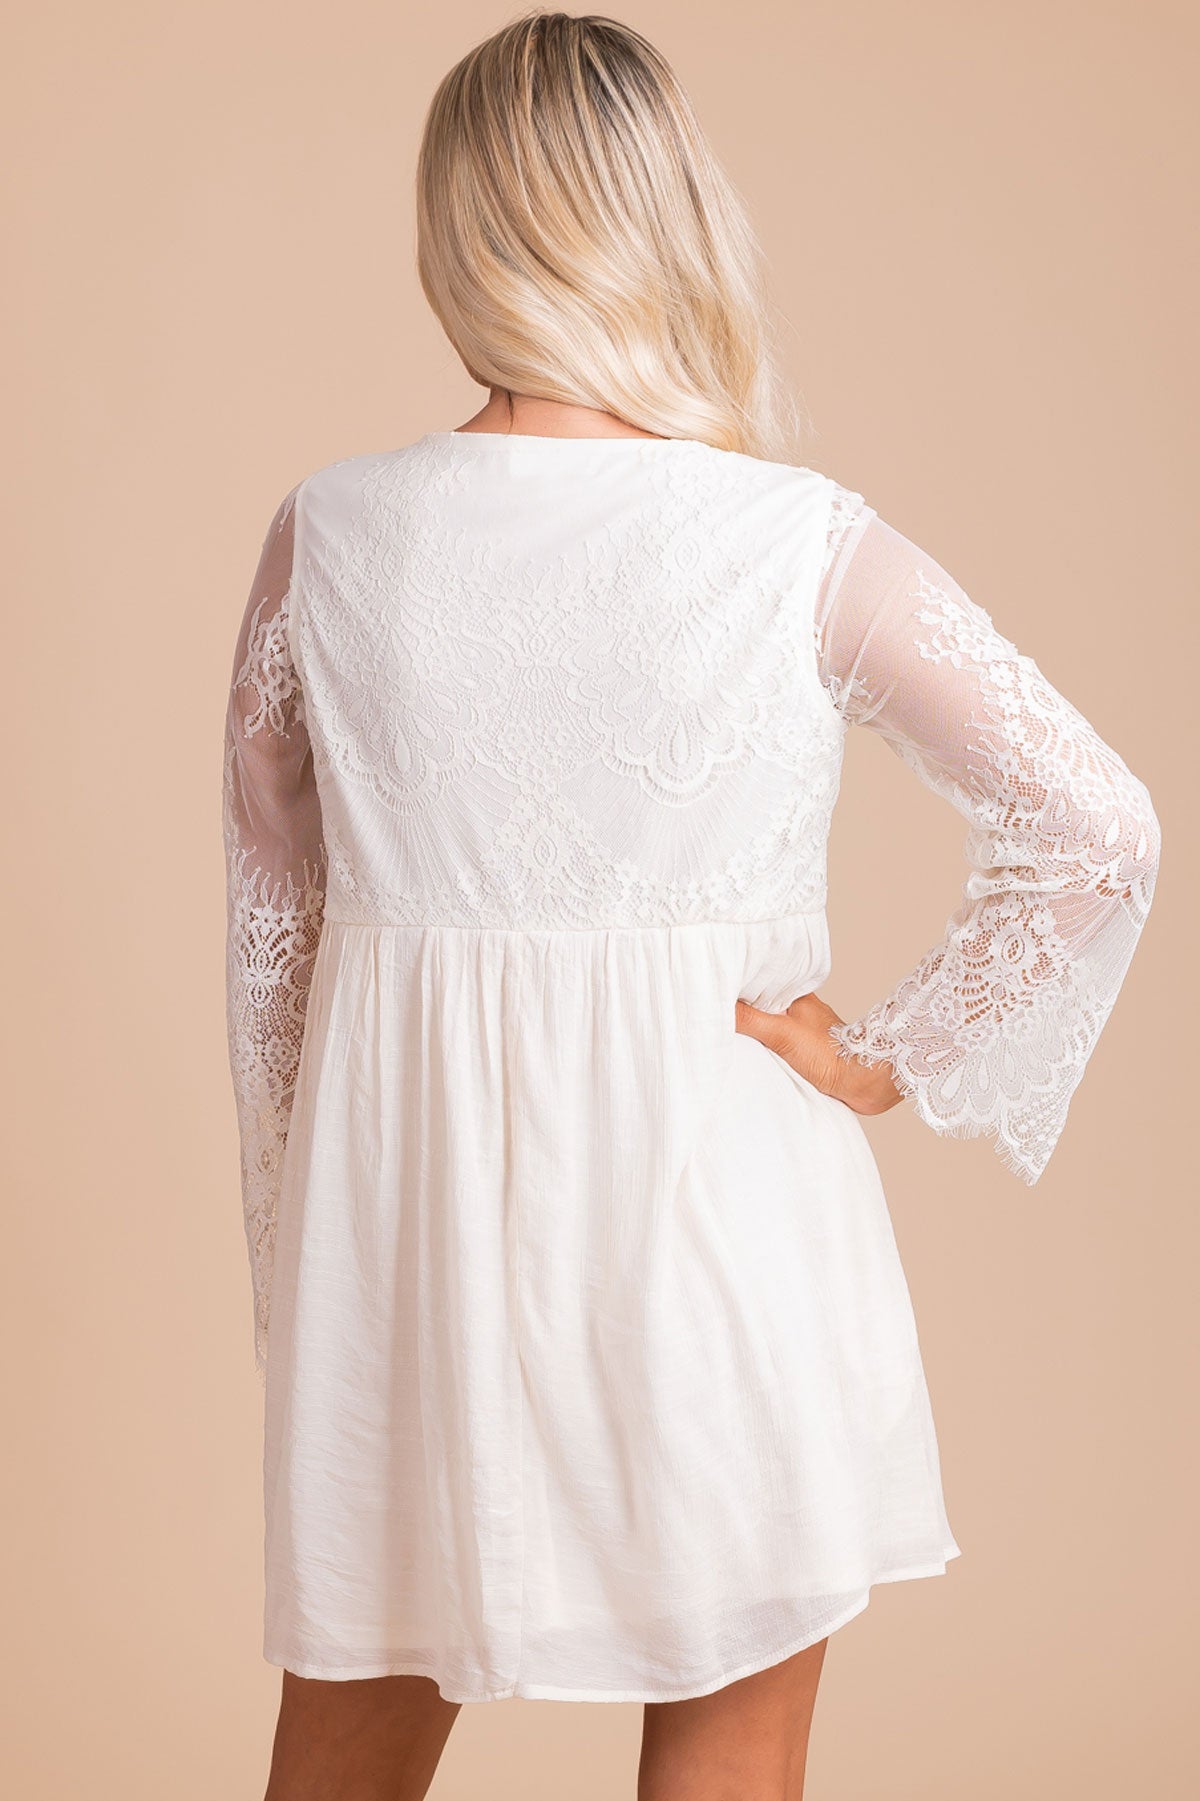 Lace Accent Mini Dress in White for Women